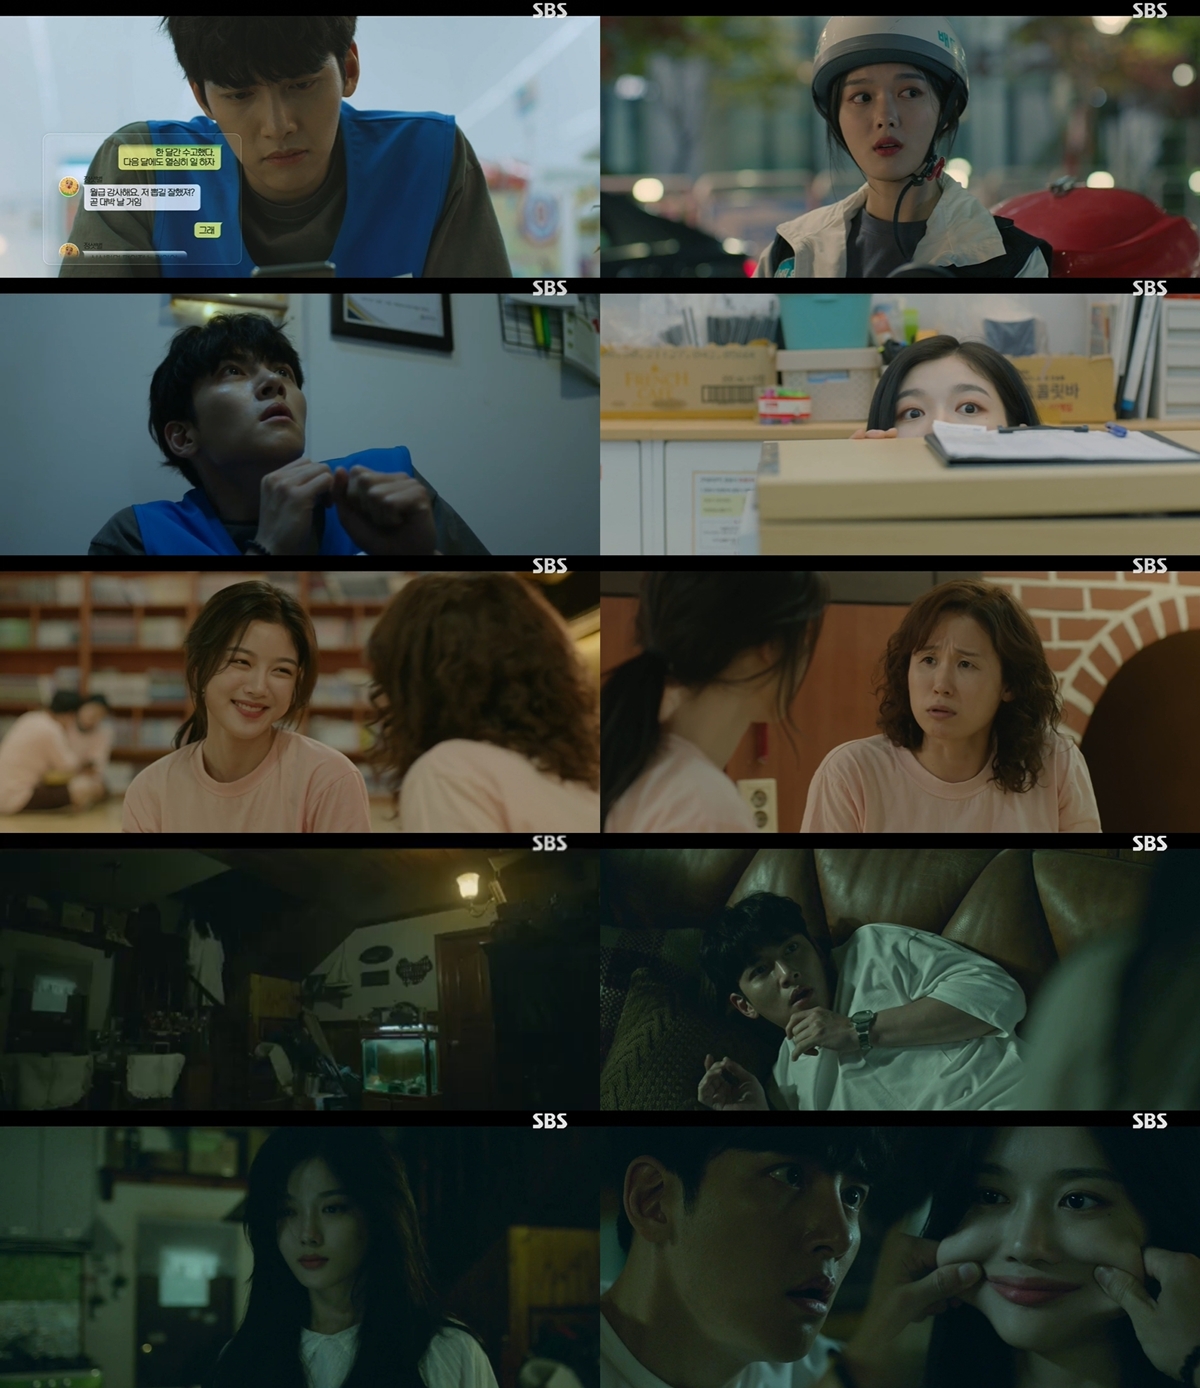 The spine is chilling in the parody of the Convenience store morning star, but the laughter bursts.In the 7th episode of SBSs Convenience Store Morning Star (playplayplay by Son Geun-joo, director Lee Myung-woo, production Taewon Entertainment), Choi Dae-heon (Ji Chang-wook) was shown at his house, playing the Slap with Kim Yoo-jung.Choi Dae-heon, who is frightened by misunderstood as a ghost in a white pajamas, gave a surprise smile and raised expectations by foreseeing the cohabitation of those who will be unfolded in the future.The broadcast began with a star star declaring to Choi Dae-heon that he would quit the Convenience store.To make matters worse, the star was forced to be kicked out of the house by real estate fraud.The The information is specificSolvin), who does not know the heart of a star with a living, has been passionate without iron, and the shoulder of the star has become heavier.The appearance of the star, which started to deliver rider Alba, caused a sense of saltiness.Choi Dae-heon was realizing the vacancy of the albasaeng star, which was strange to say that the star suddenly quit the Convenience store.My friend Han Dal-sik (Mun Moon-seok) even spread all kinds of imaginary stories, saying that he quit because of the problem of passion.Here, the family, including the mother and father, searched for Choi Dae-heon and wiped out Choi Dae-heon, and Choi Dae-heon suffered alone without telling him that the star had quit.In the meantime, another back-to-back incident occurred to the star, who had all the money he had collected for his brother The information is specific, saying he would make his idol debut.Jung Sae-byeol, who was devastated, accidentally met Choi Dae-heons mother, Gong Bun-hee (Kim Sun-young), in the jjimjilbang, and the two of them talked about the troubles of the house and formed a consensus.Gongbun-hee was late to find out that the star was fraudulent in real estate, and worried about the star.Choi Dae-heon, who returned home in the middle of the night, was pictured facing the star.Choi Dae-heon found a woman in a white pajamas on the second floor staircase, and was surprised to find her ghost, and once again surprised to see the identity of the woman who came close.Choi Dae-heon, who was confused about whether he was a dream or a reality, pulled the ball of the star and confirmed his identity. The broadcast was finished with the appearance of two people who met in one house.The surprise Slap ending, which implies their cohabitation, has raised expectations and curiosity for the next broadcast.Convenience store Morning Star captivated the house theater with a chilly smile on the back of the heat.Choi Dae-heon, who faced a star at home in the middle of the night, made viewers laugh with a horror movie parody.In the previous scene, Choi Dae-heon became a timid in the story of the Convenience store ghost, and was surprised by the popularity of the star who sneaked into the Convenience store. Ji Chang-wook and Kim Yoo-jung gave a different pleasure to viewers with hot and comic chemistry.The 7th Convenience store Morning Star showed 7.5% of the Seoul metropolitan areas household ratings (based on 2 copies, Nielsen Korea), and the highest audience rating per minute was 8.6%.The 8th episode of SBSs Convenience store Morning Star, which is expected to be held at 10 pm today (11th), will be broadcast at 10 pm.